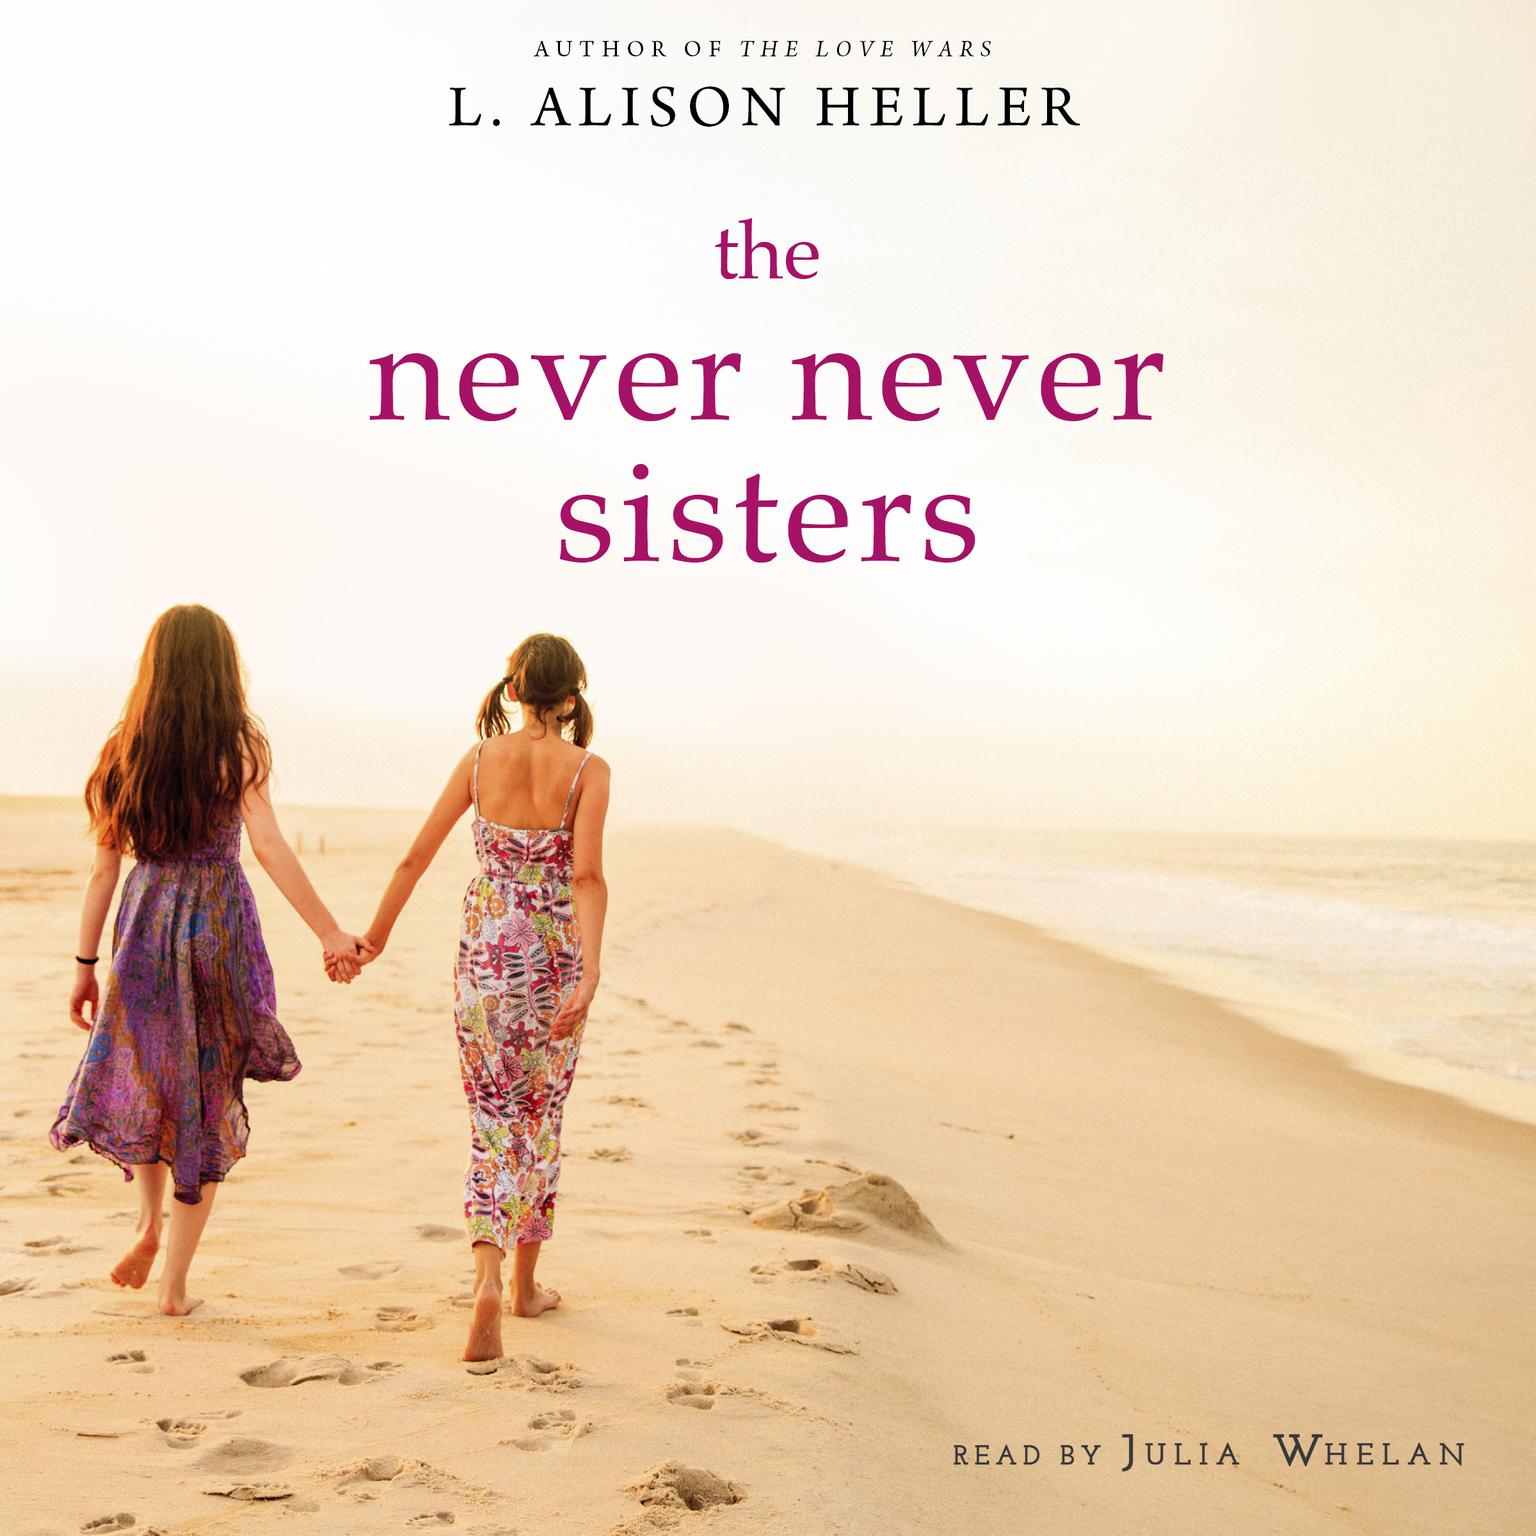 The Never Never Sisters Audiobook, by L. Alison Heller